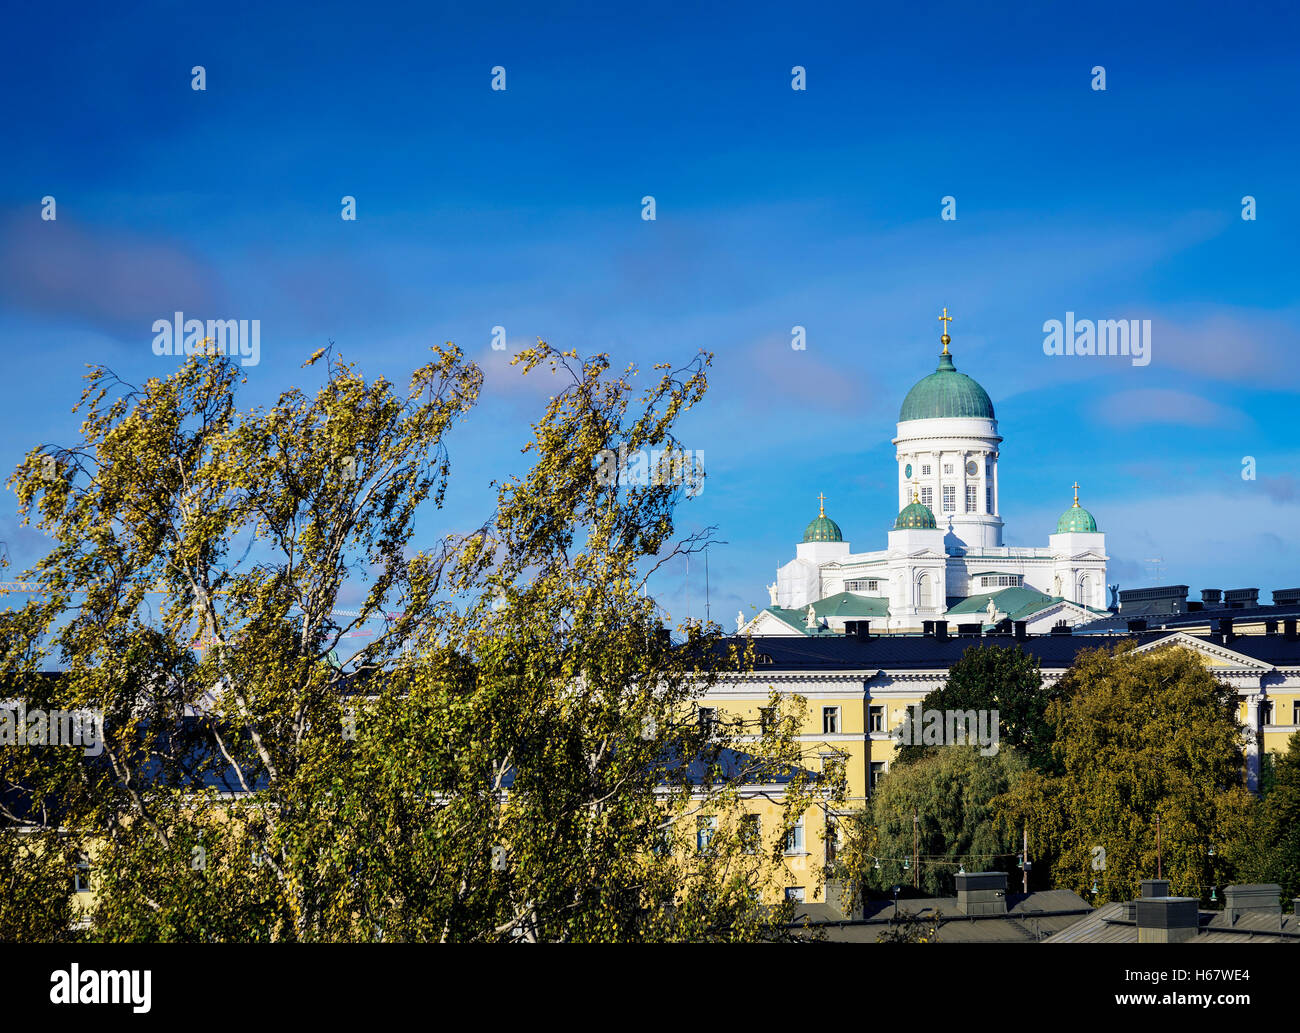 cathedral landmark and central helsinki city view in finland Stock Photo